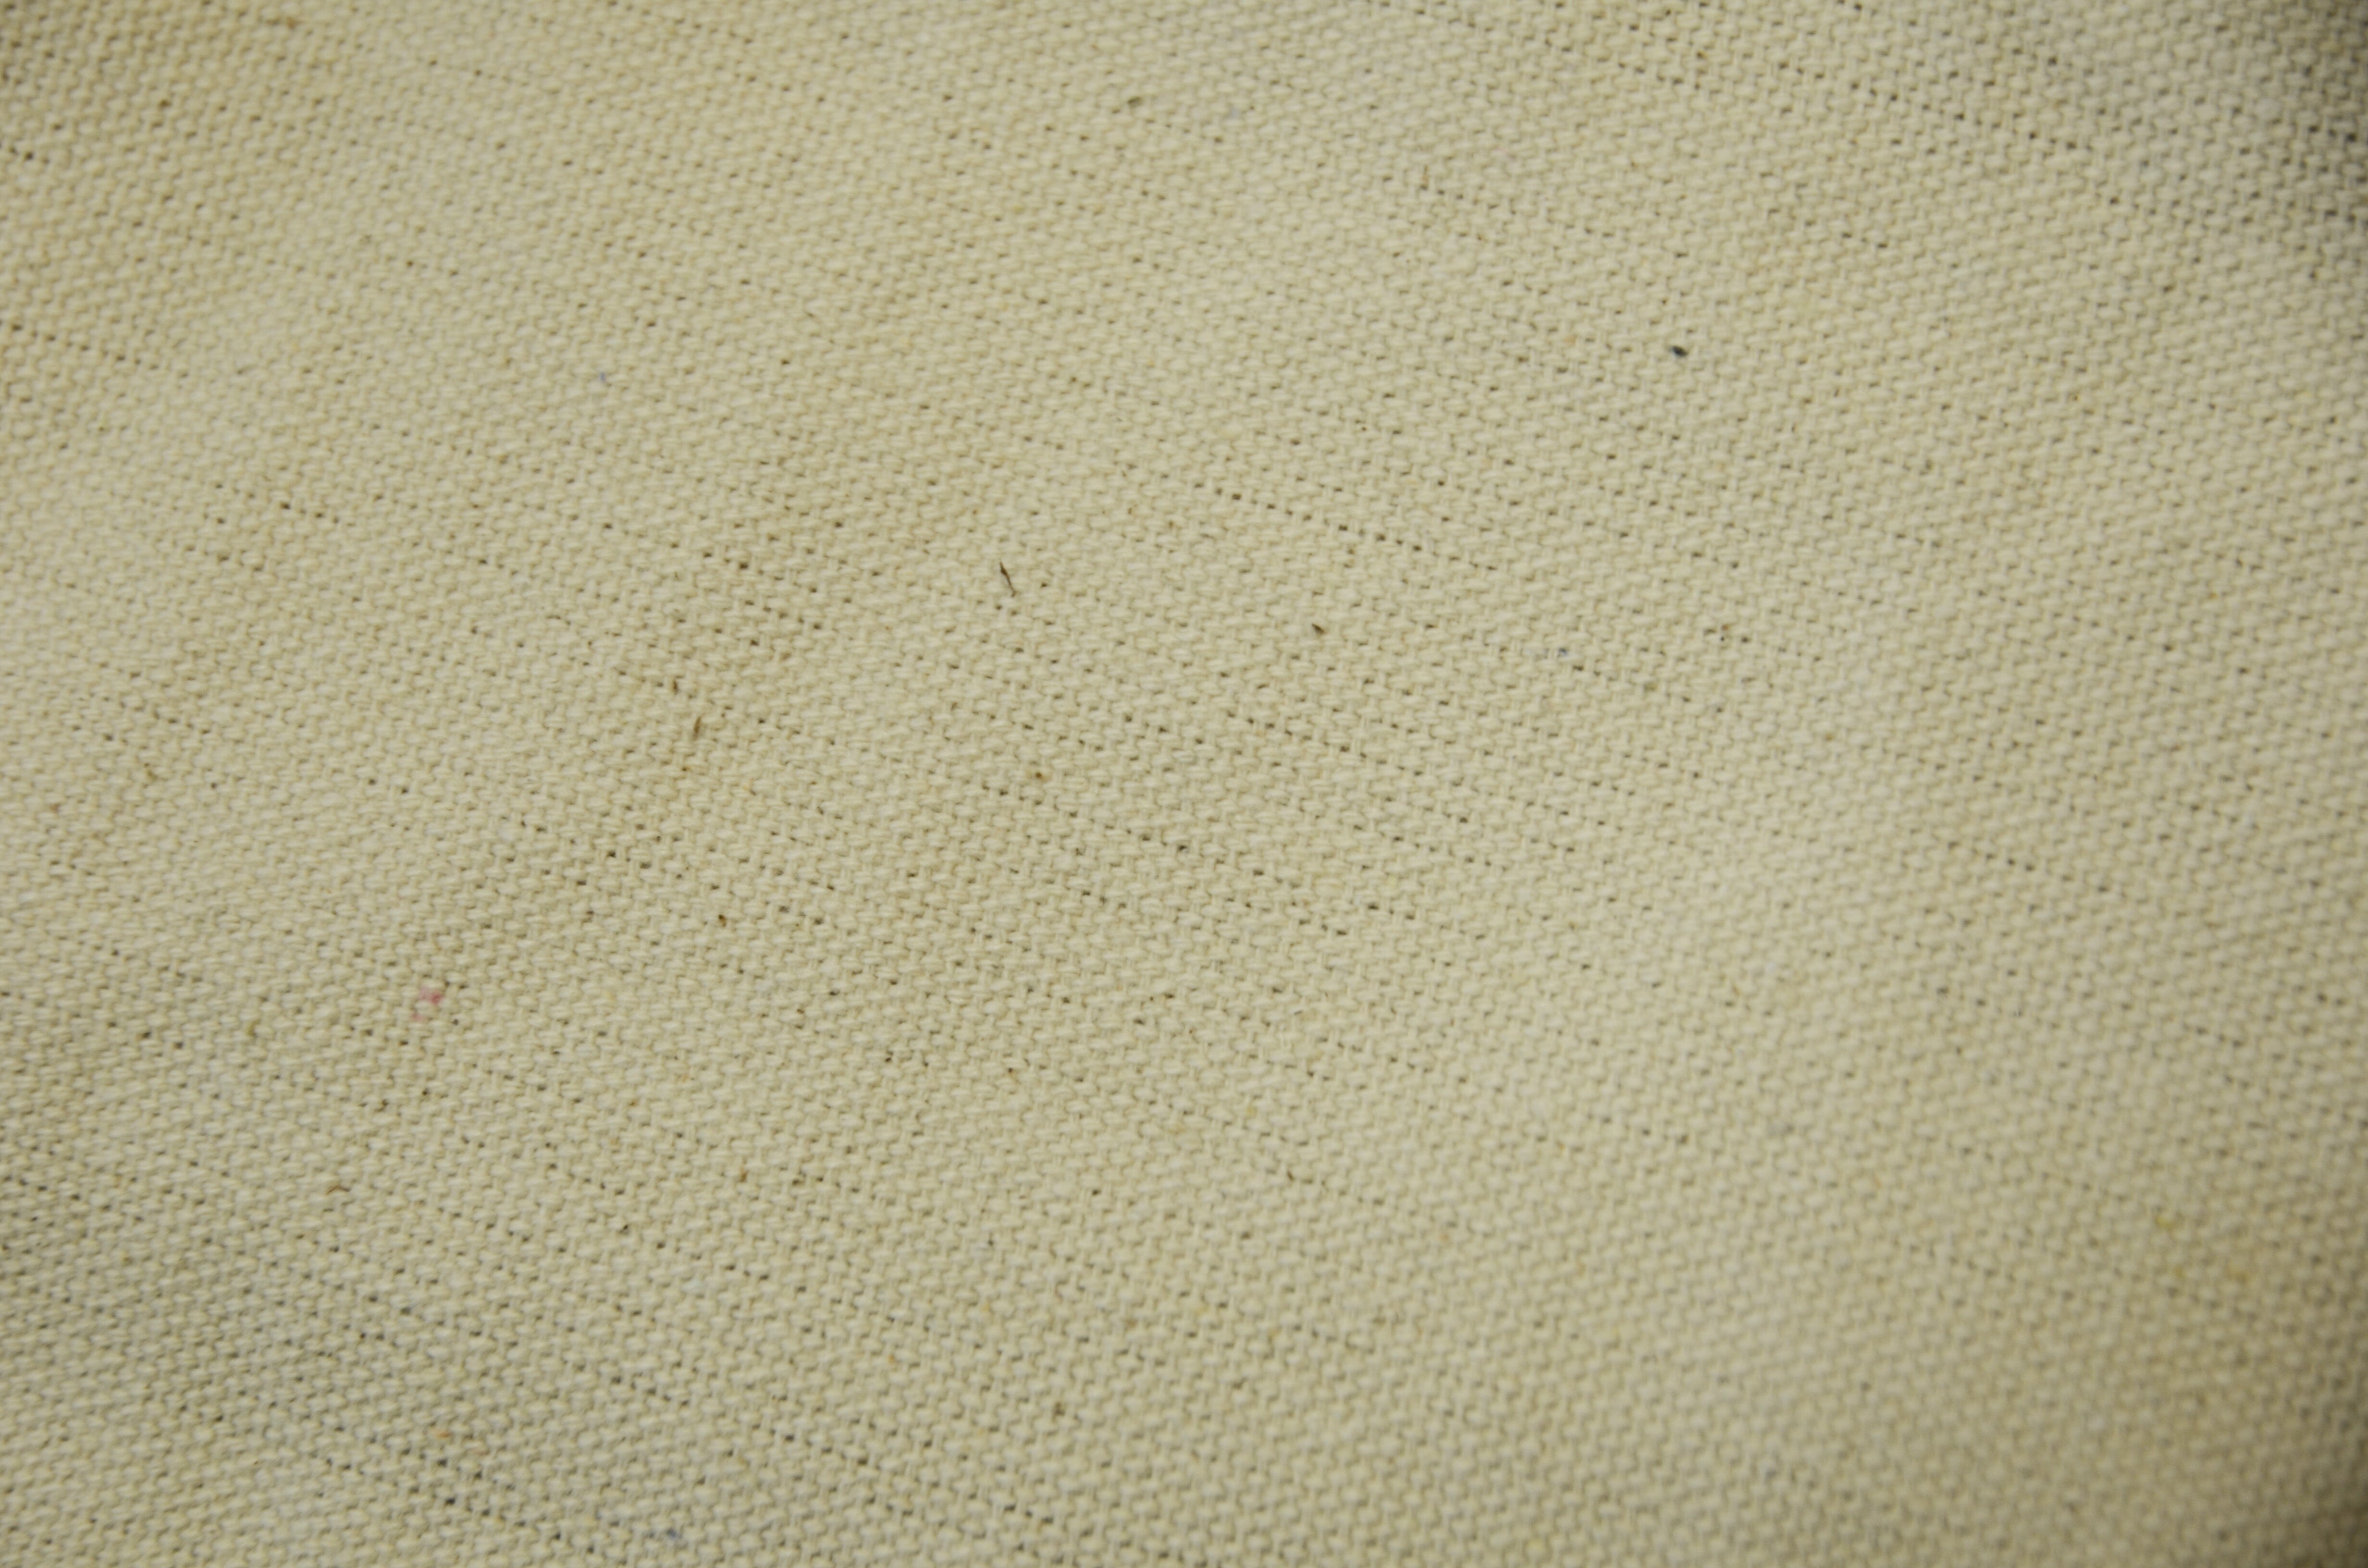 White Canvas Fabric by The Yard -9/10 oz 58/60 Wide